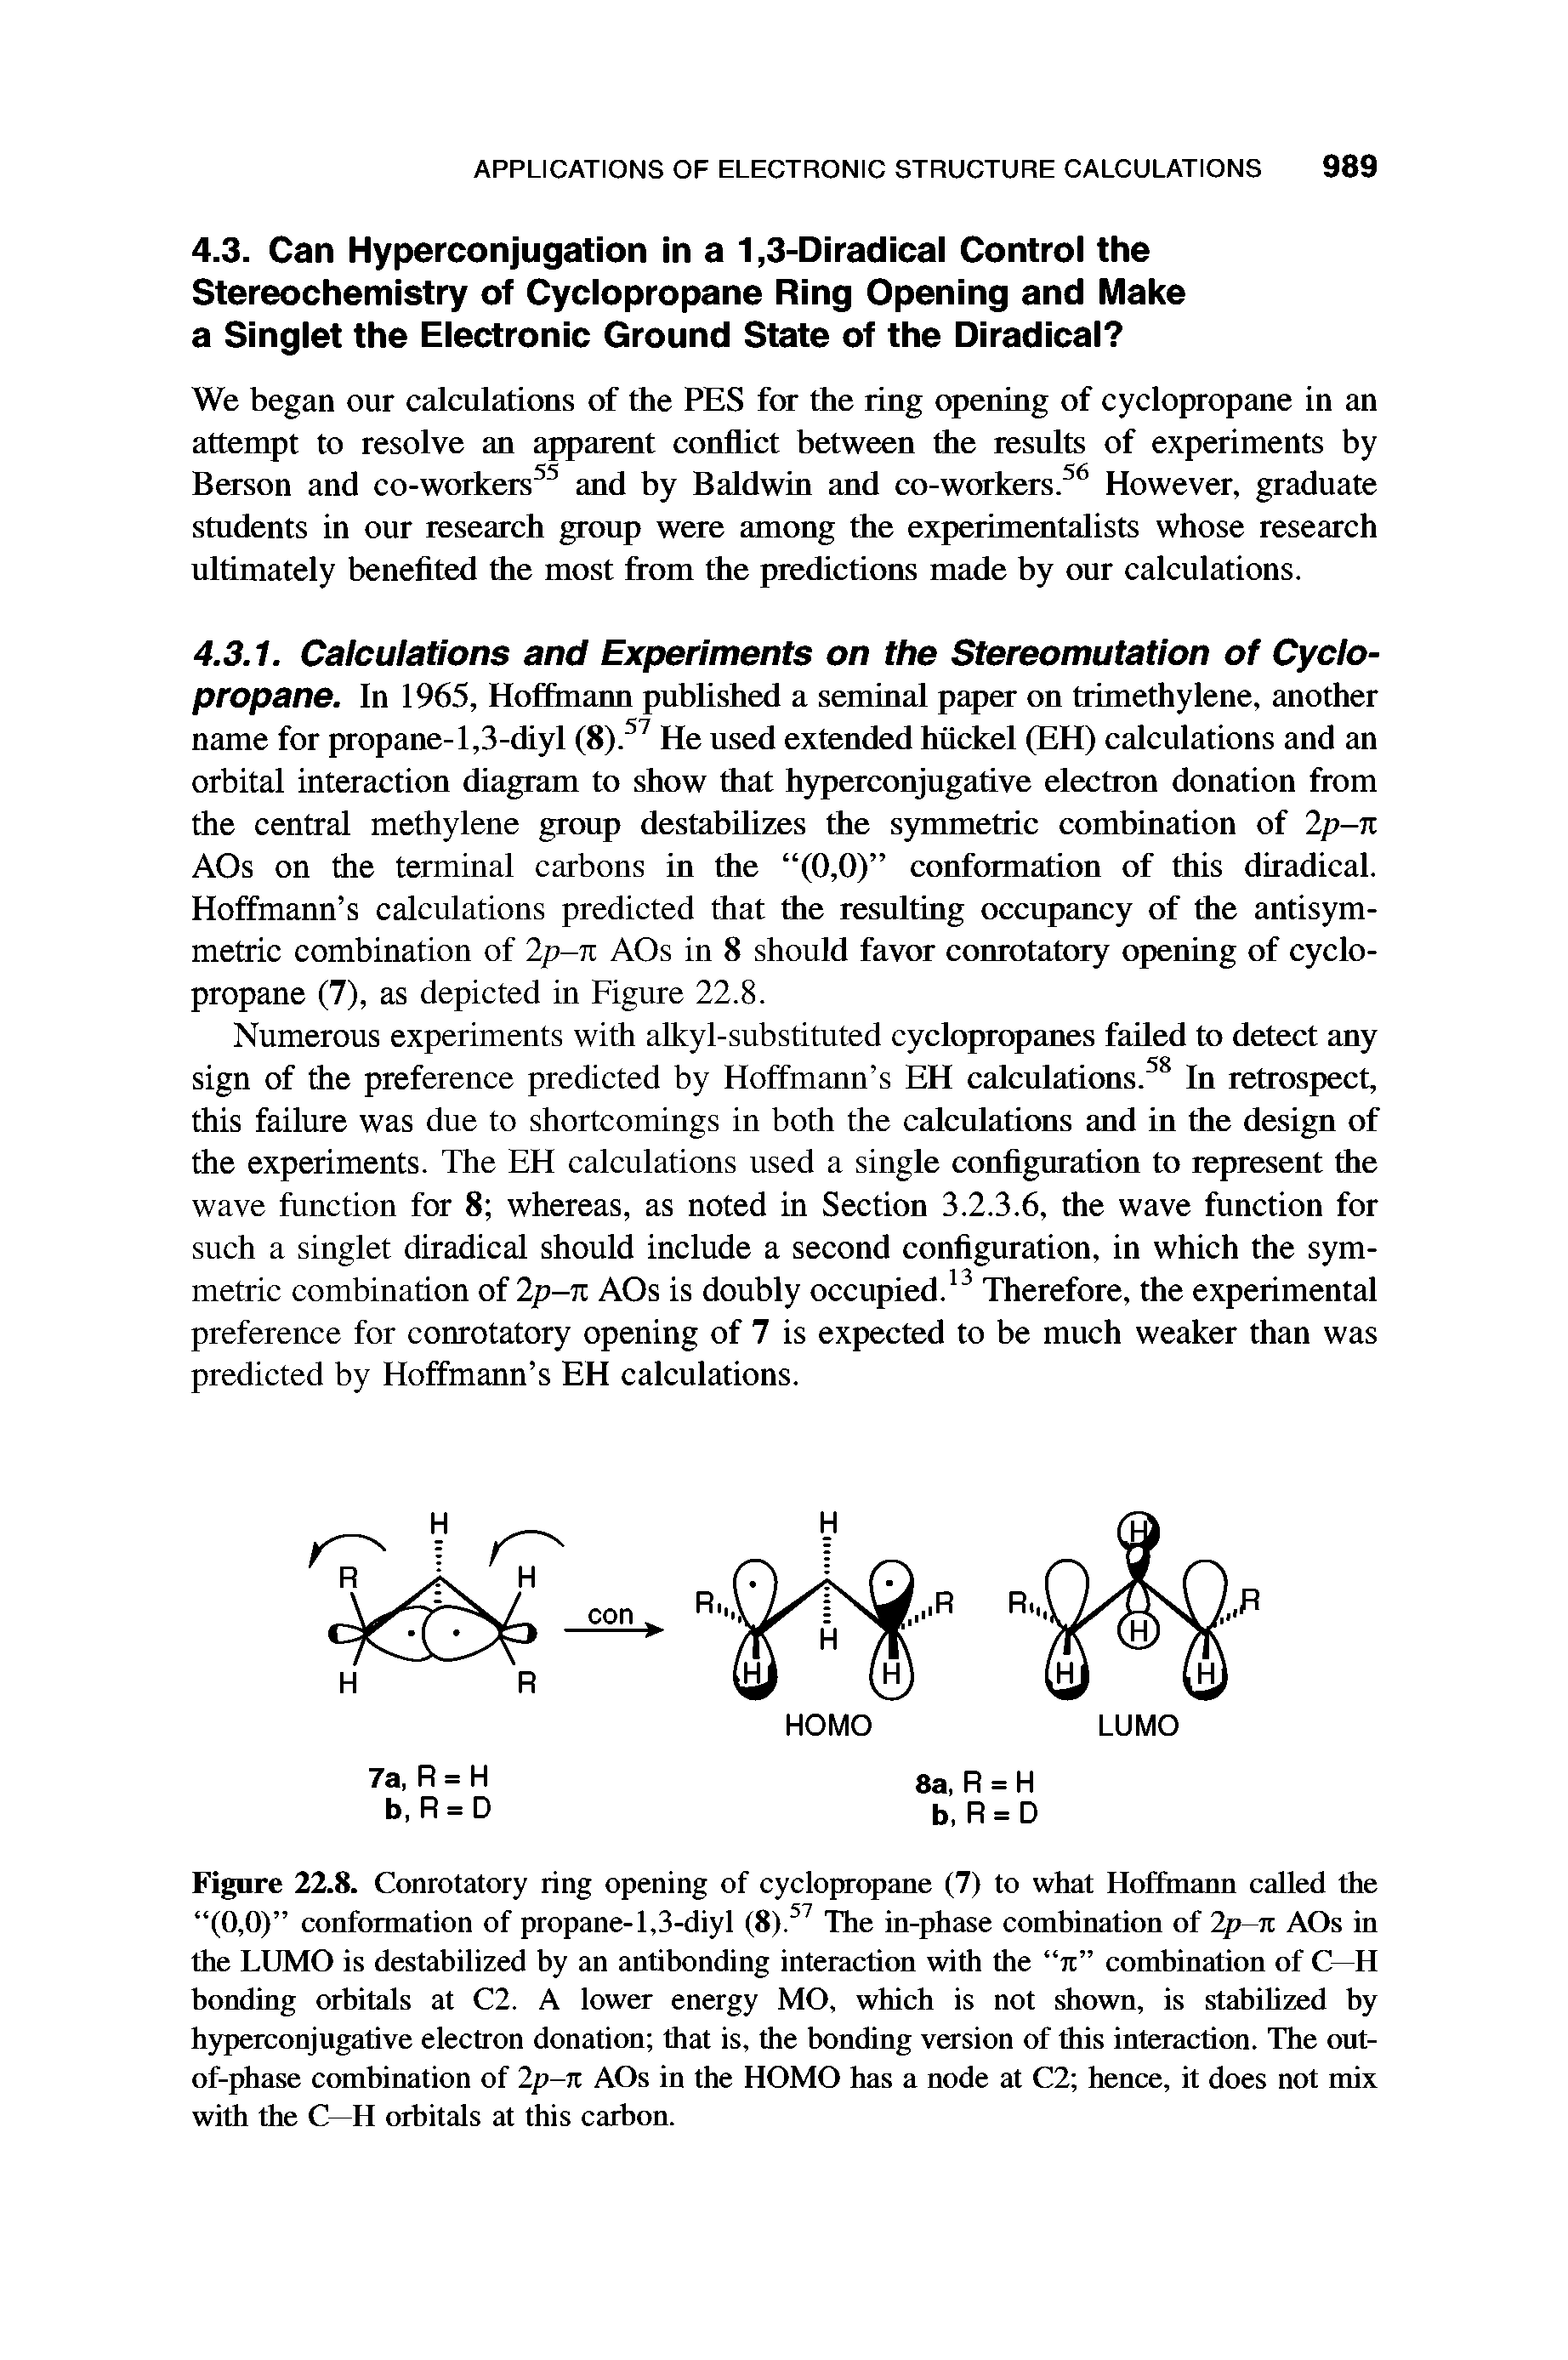 Figure 22.8. Conrotatory ring opening of cyclopropane (7) to what Hoffmann called the (0,0) conformation of propane-1,3-diyl (8). The in-phase combination of Ip-n AOs in the LUMO is destabilized by an antibonding interaction with the re combination of C—H bonding orbitals at C2. A lower energy MO, which is not shown, is stabihzed by h3fperconjugative electron donation that is, the bonding version of this interaction. The out-of-phase combination of 2p-n AOs in the HOMO has a node at C2 hence, it does not mix with the C—H orbitals at this carbon.